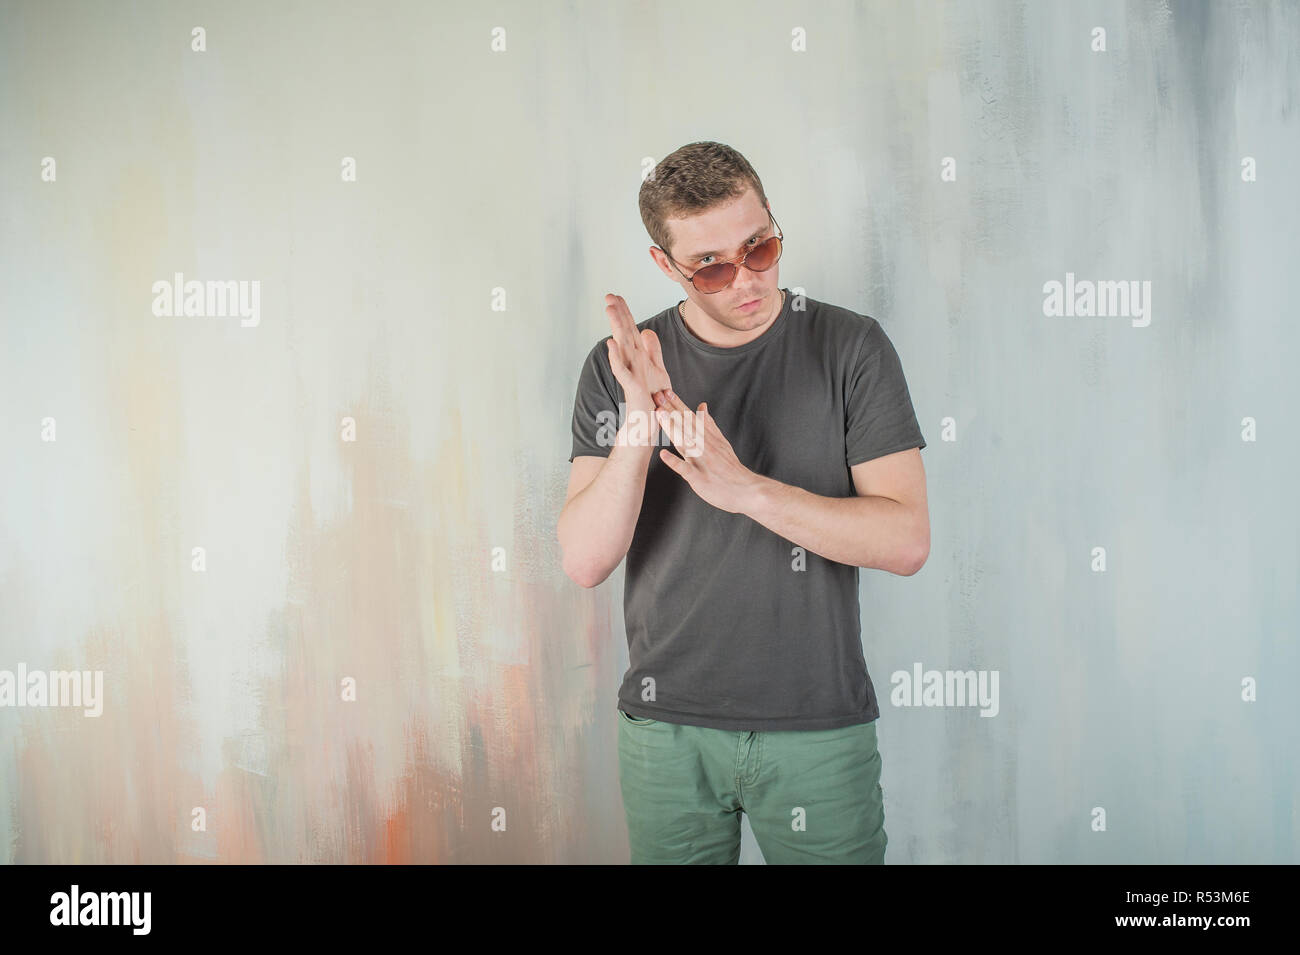 studio photography young brutal guy. man in sunglasses, T-shirt, jeans on a background colorful painted walls. his hands clasped palm to palm rubbing them Stock Photo